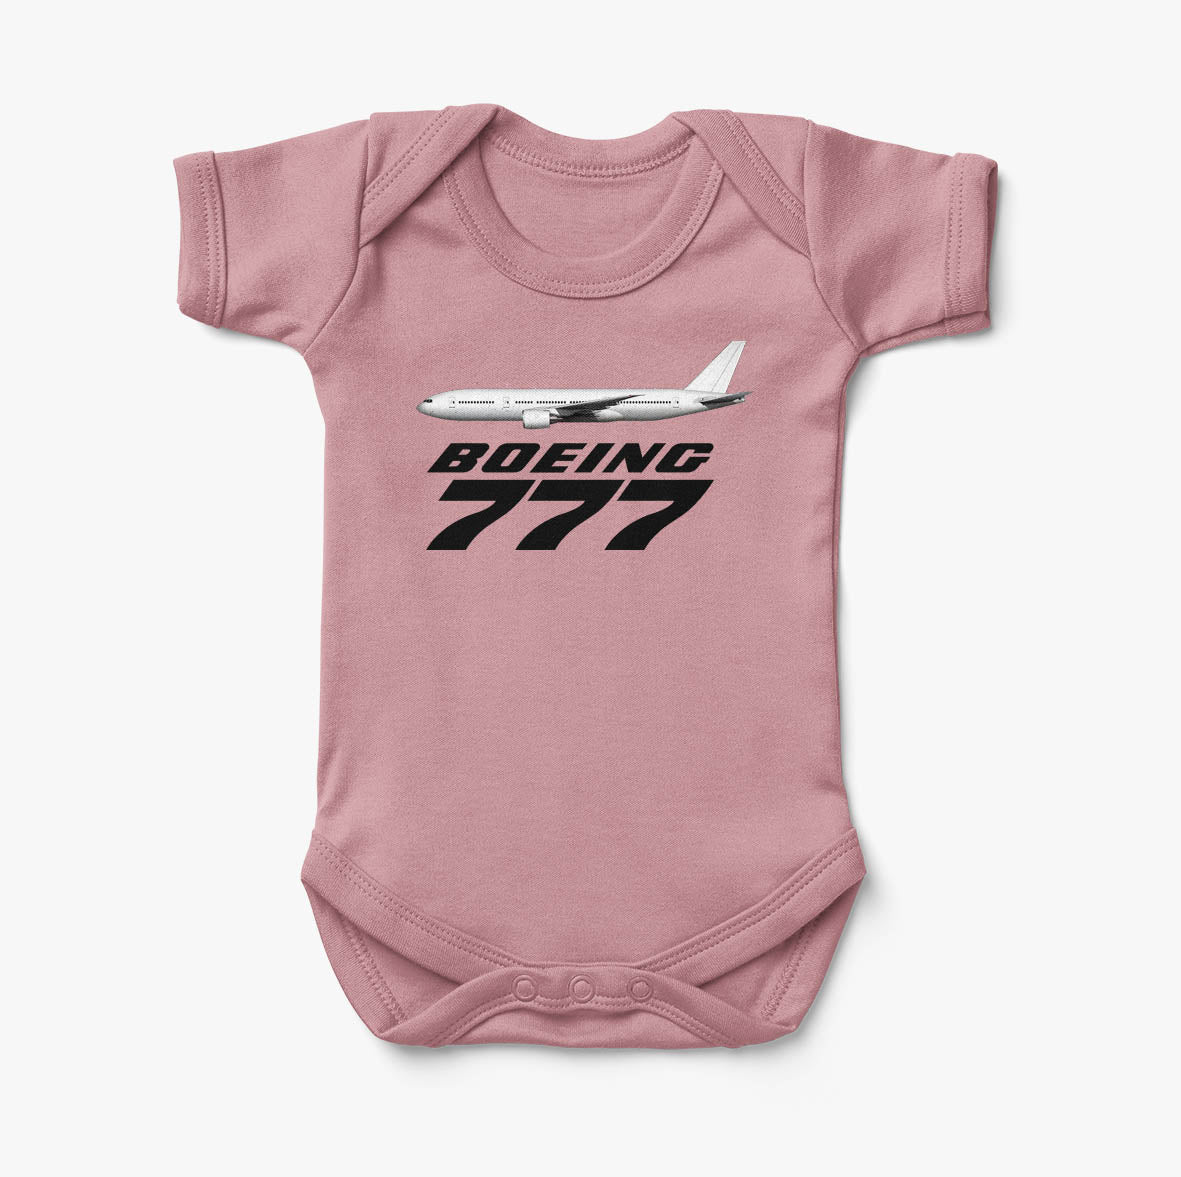 The Boeing 777 Designed Baby Bodysuits